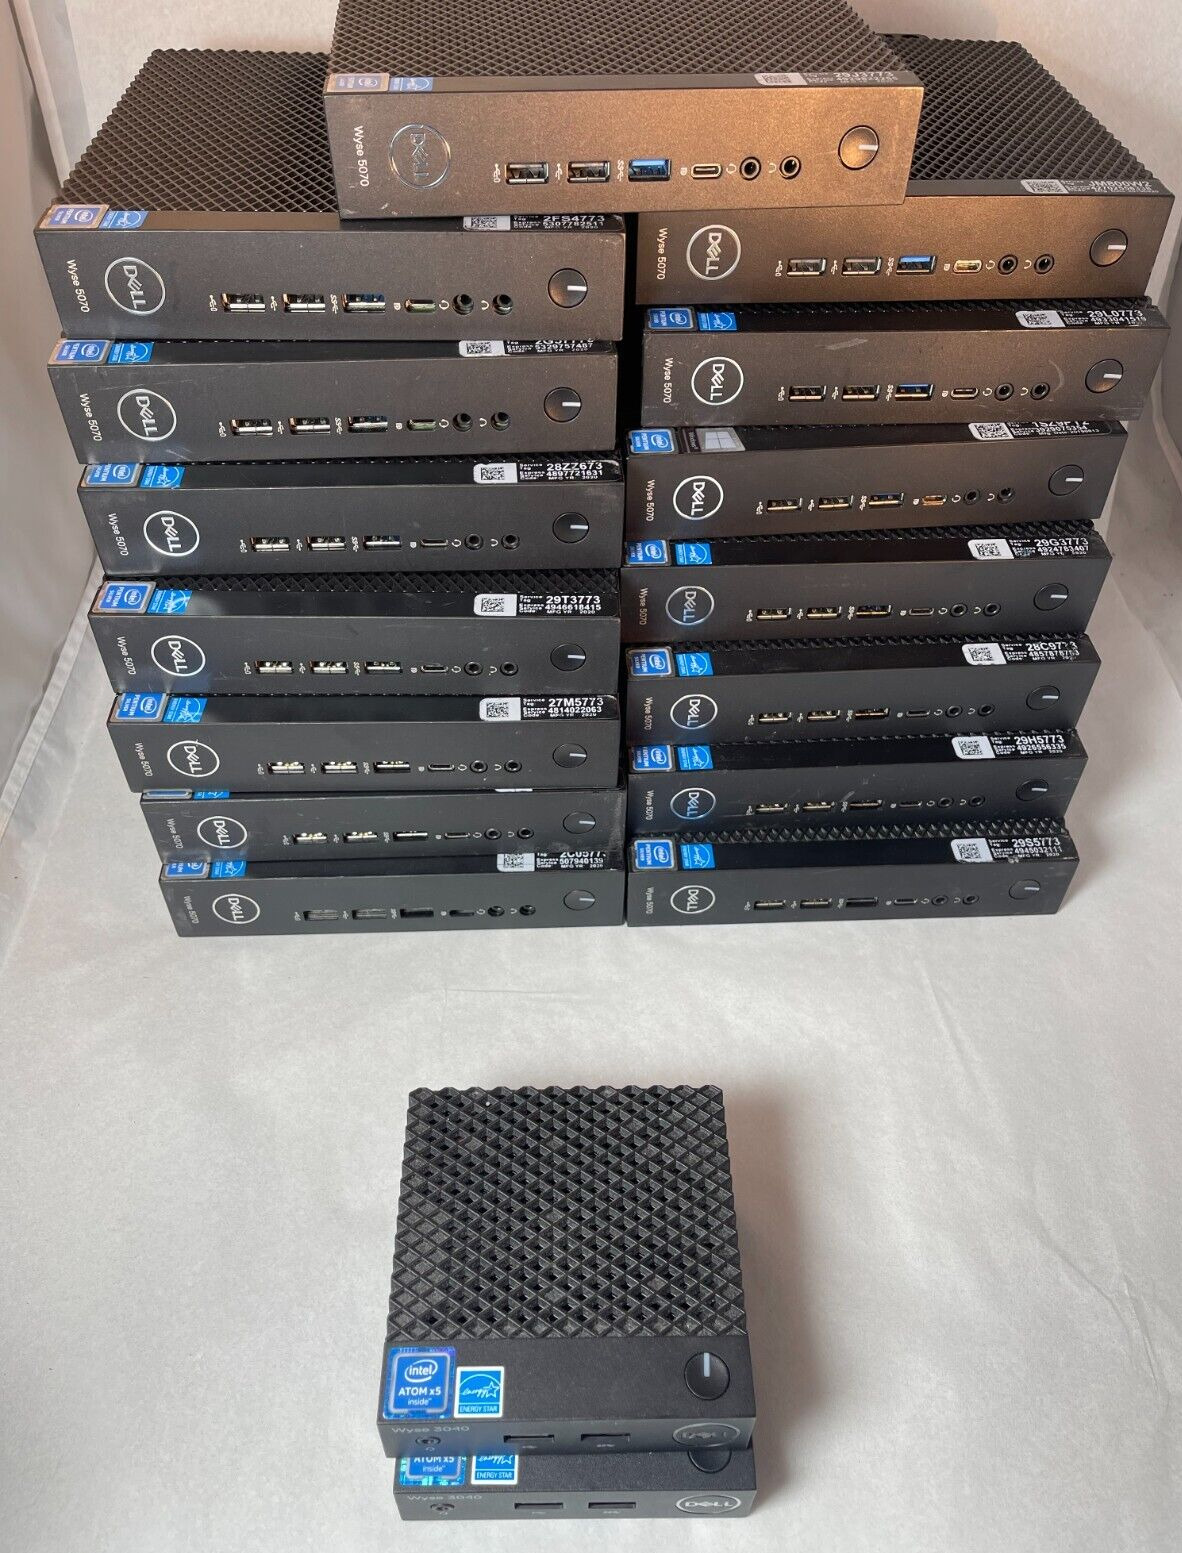 Lot of 15 Dell WYSE 5070, Plus 2 Wyse 3040 Thin Clients - No SSD - As Is